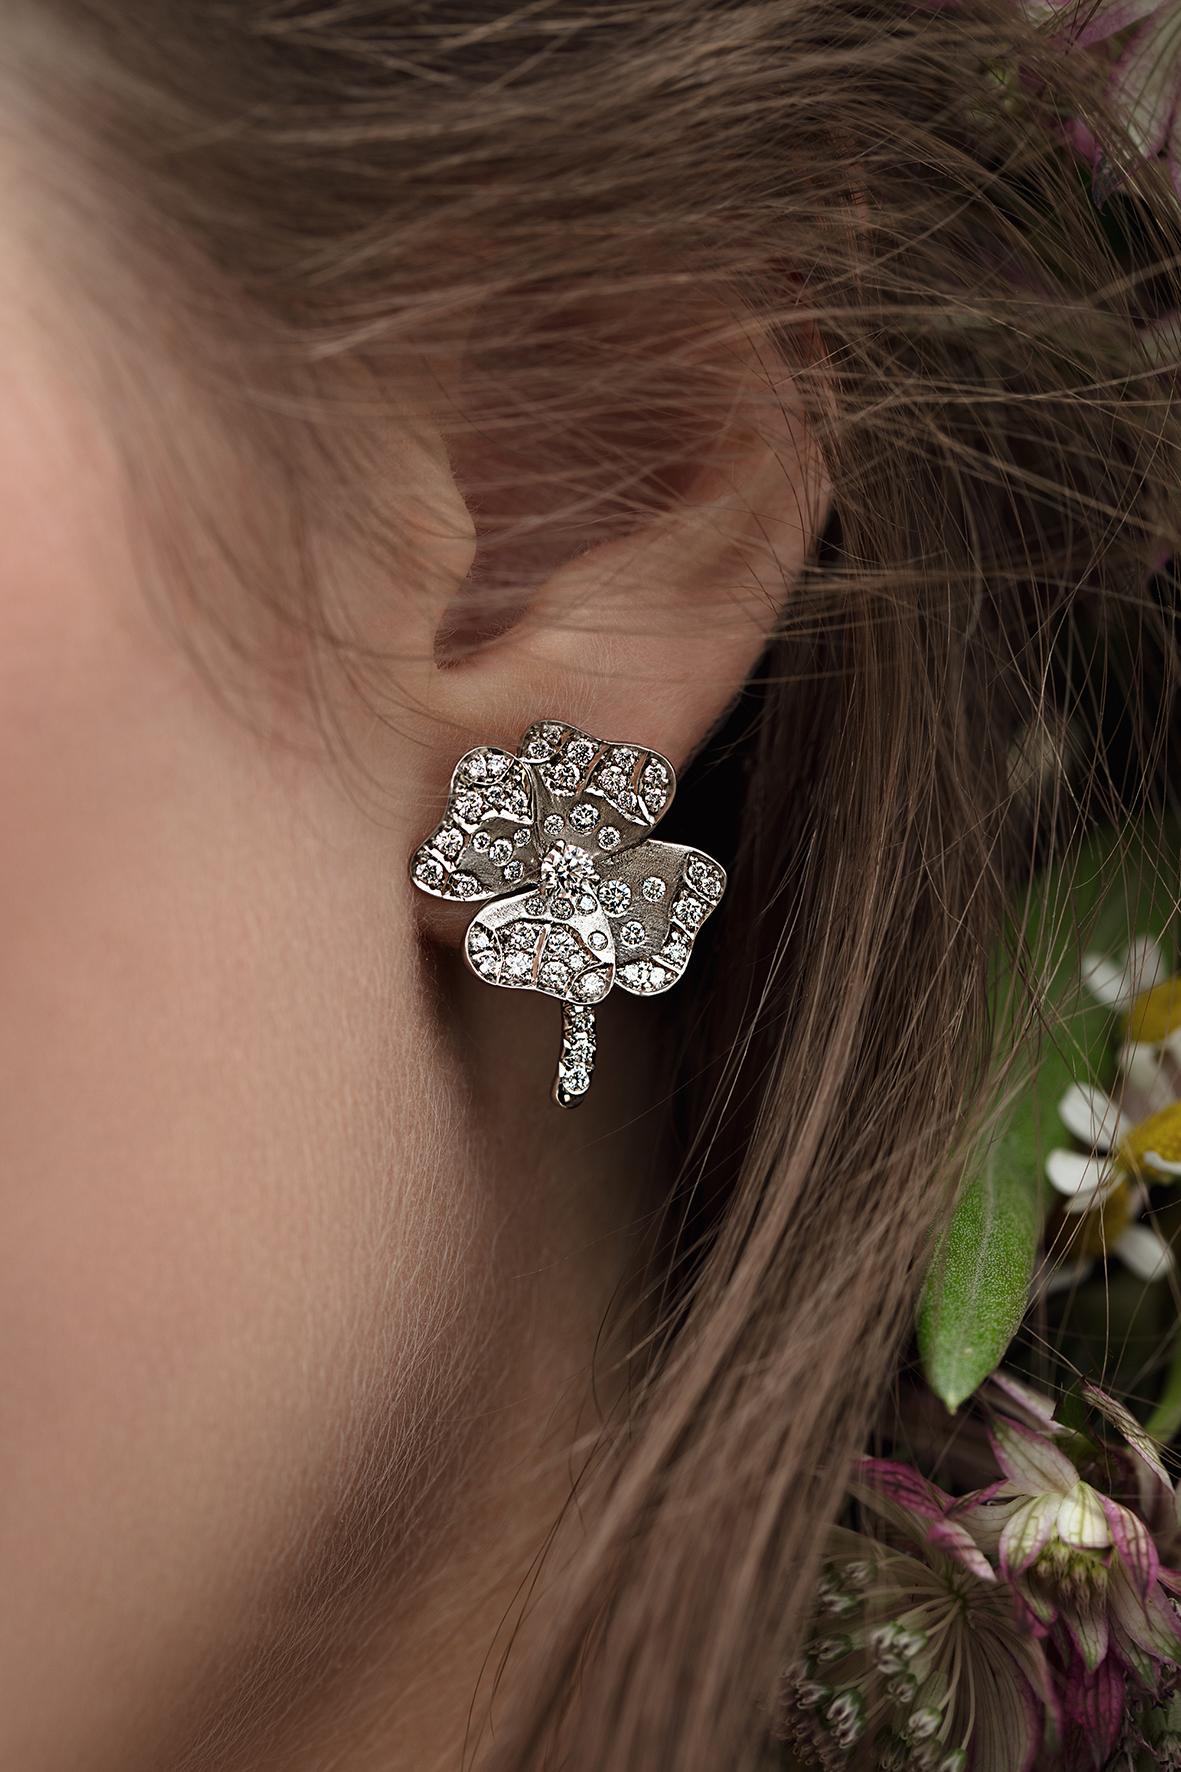 Earrings handcrafted in Palladium and White Gold with White Diamonds

Paving: White Diamonds 1,05ct.
Material: Palladium 950; White Gold 750
Stunning Earrings handcrafted in Palladium and White Gold with Yellow Sapphires and White